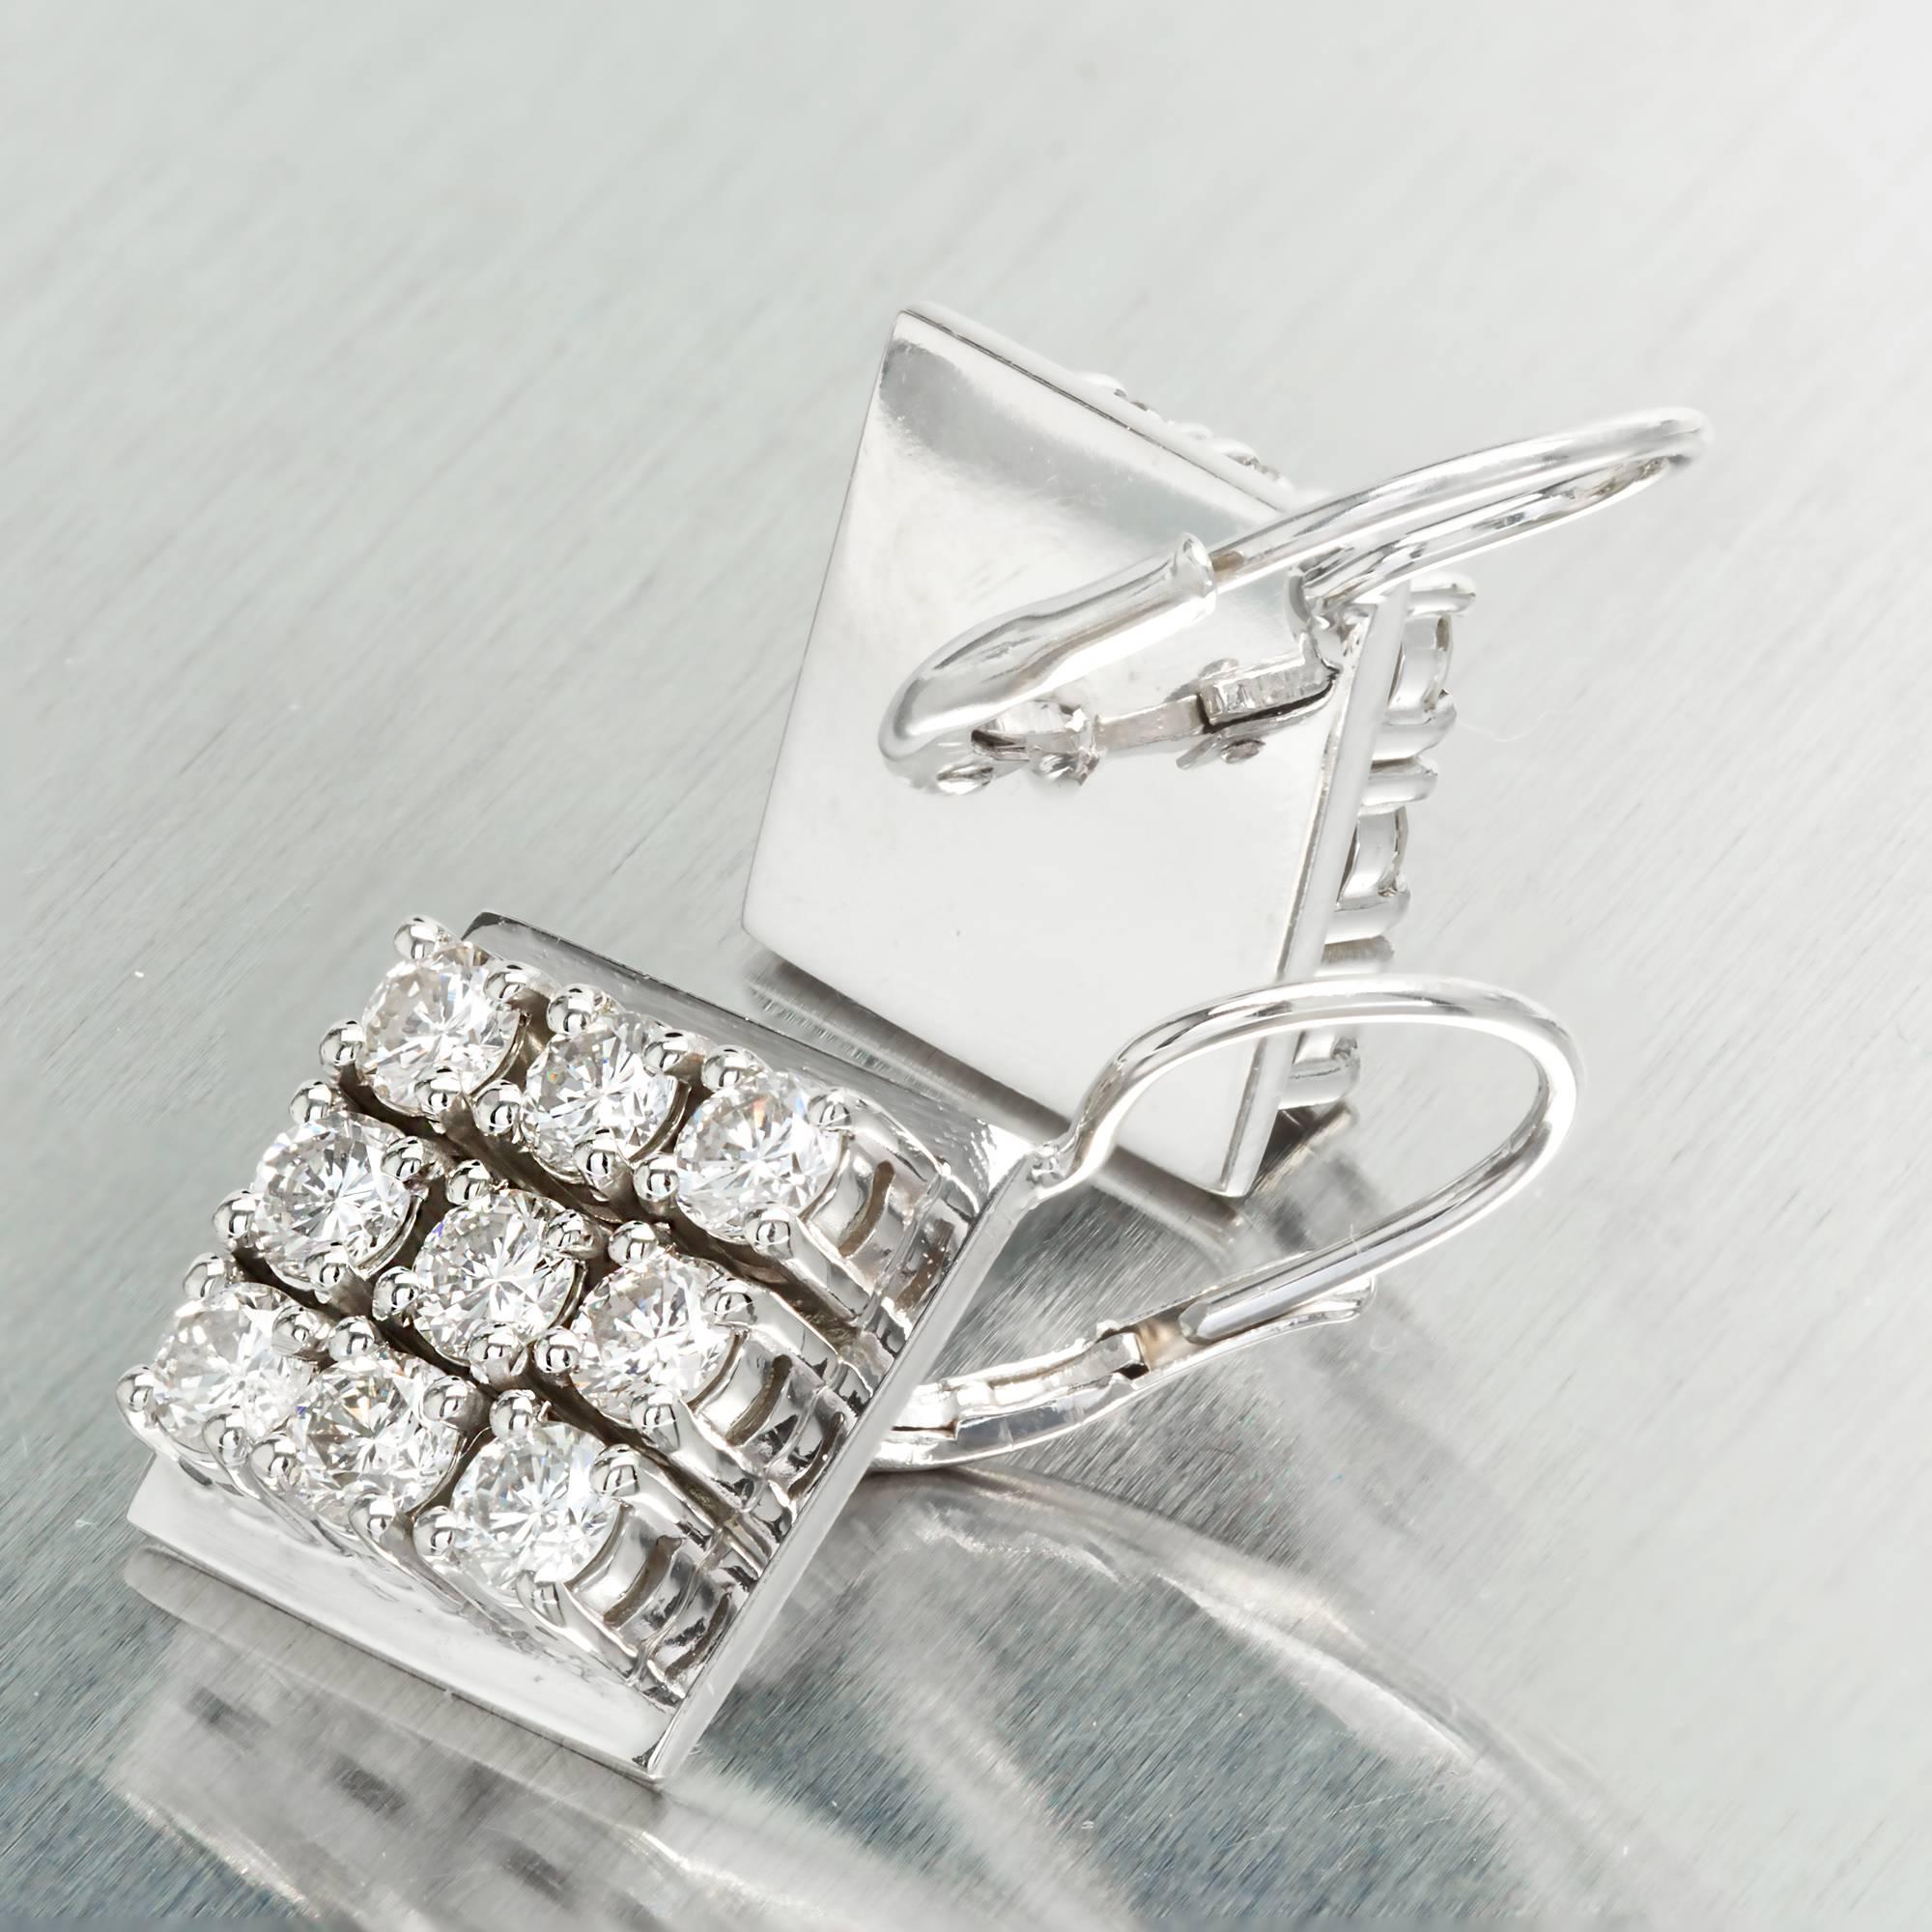 Sparkly diamond square cluster earrings with secure Euro wire tops. Each frame is set with 16 round full cut diamonds in square clusters with a total weight of 2.70cts. Circa 1960-1970. The white gold setting enhances the brilliance of the diamonds,